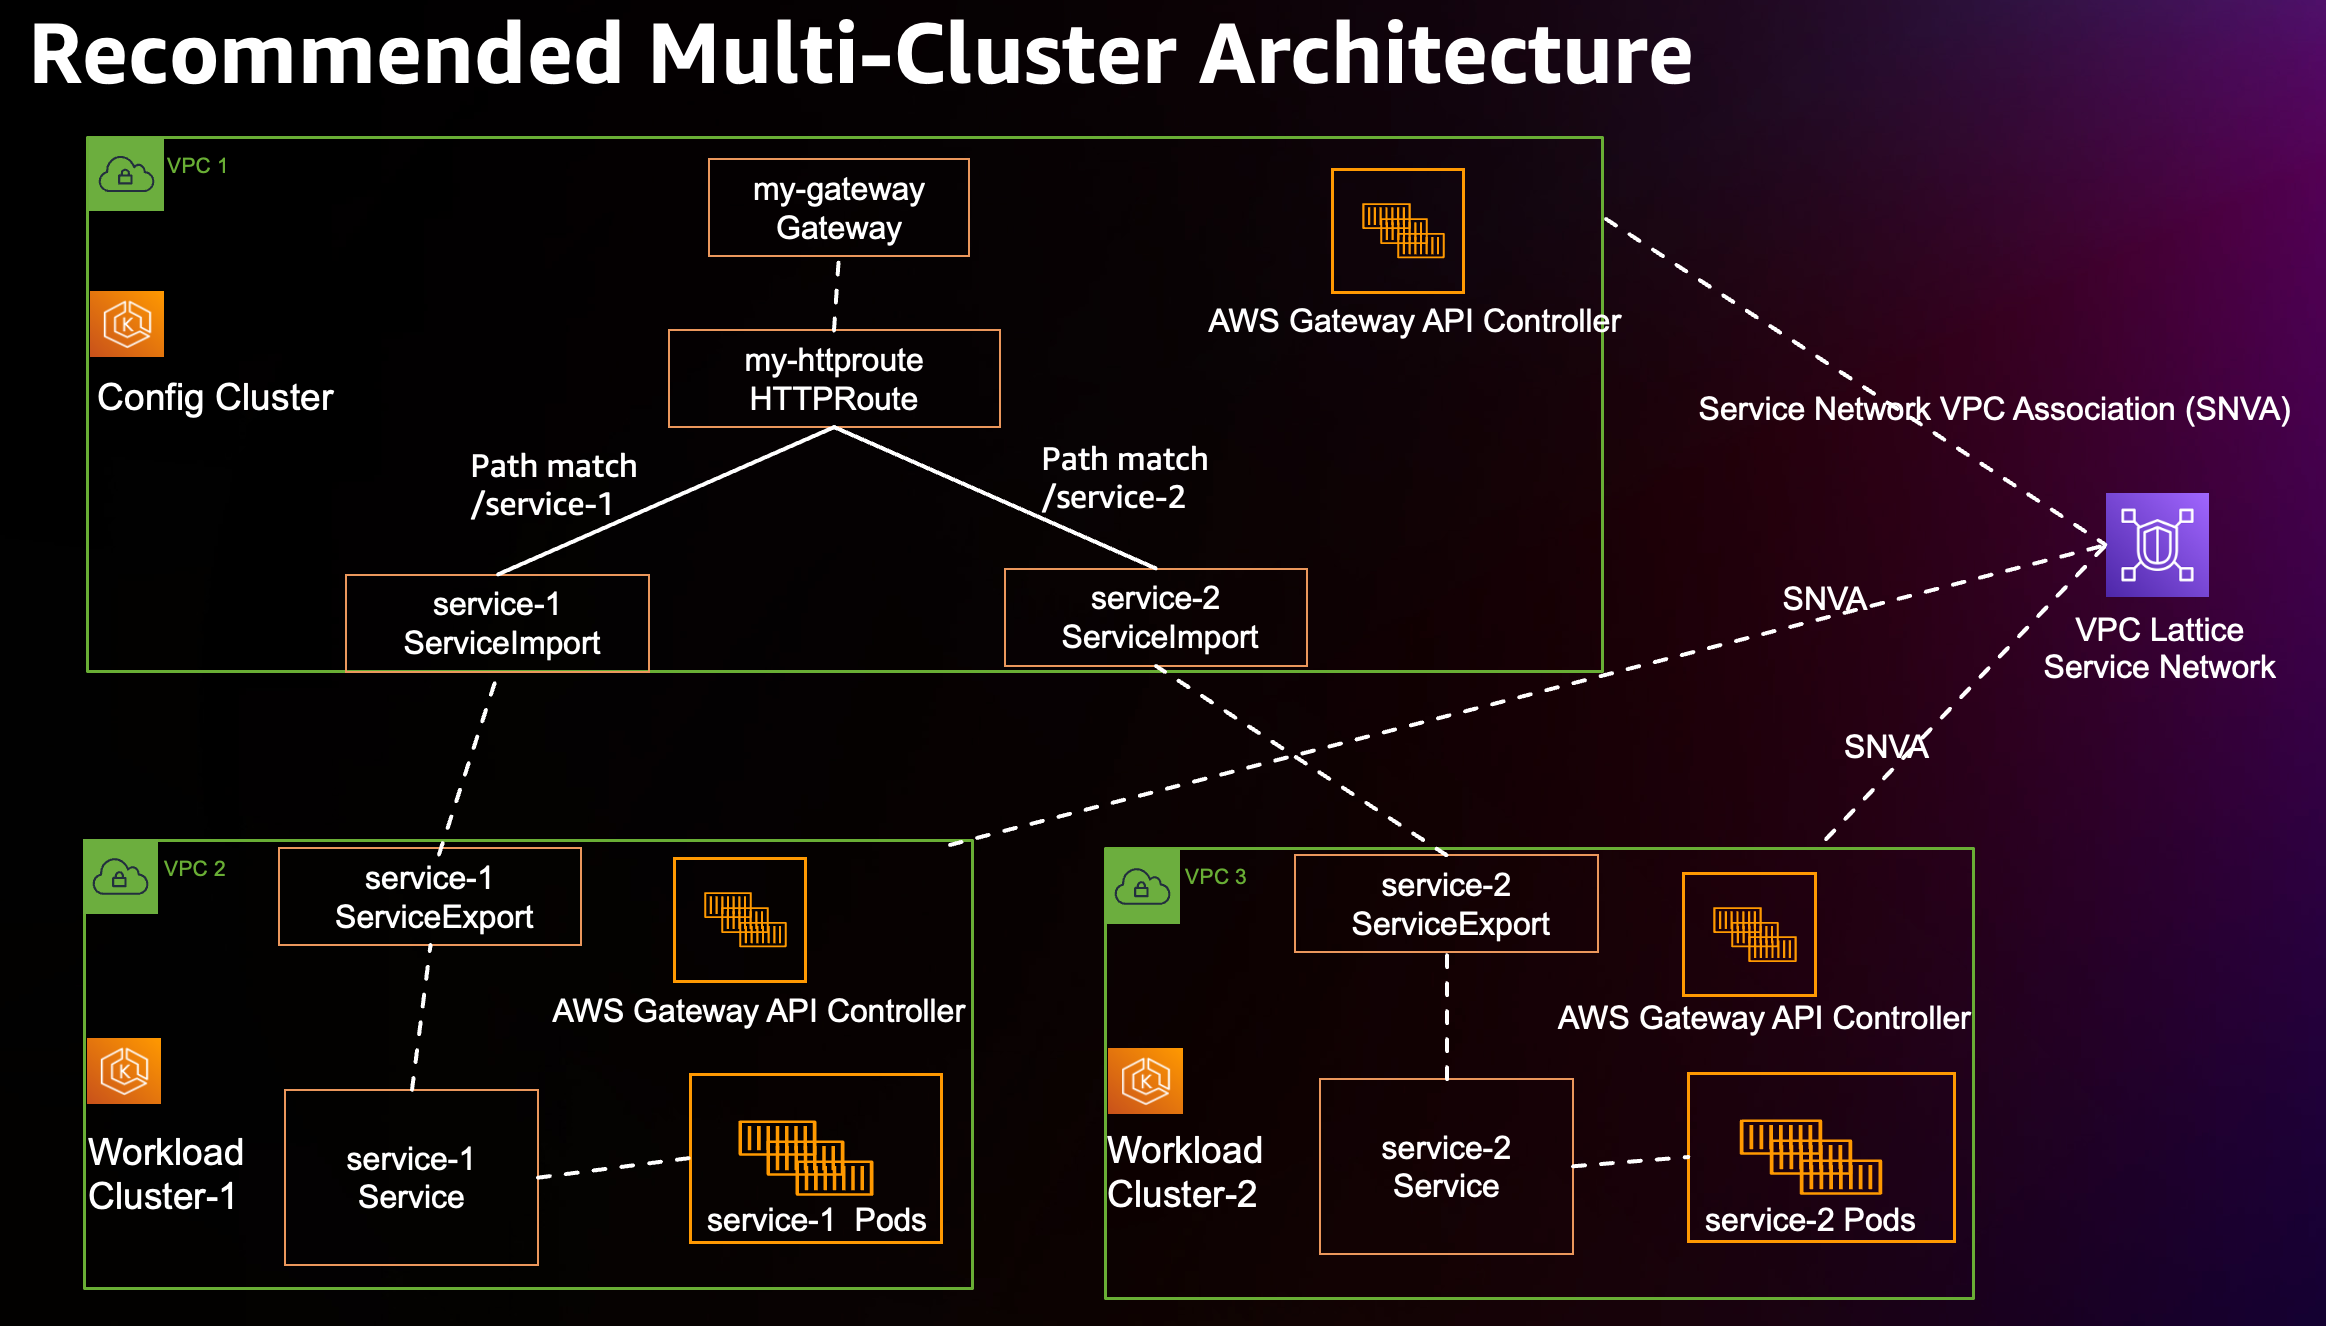 config cluster and multiple workload clusters